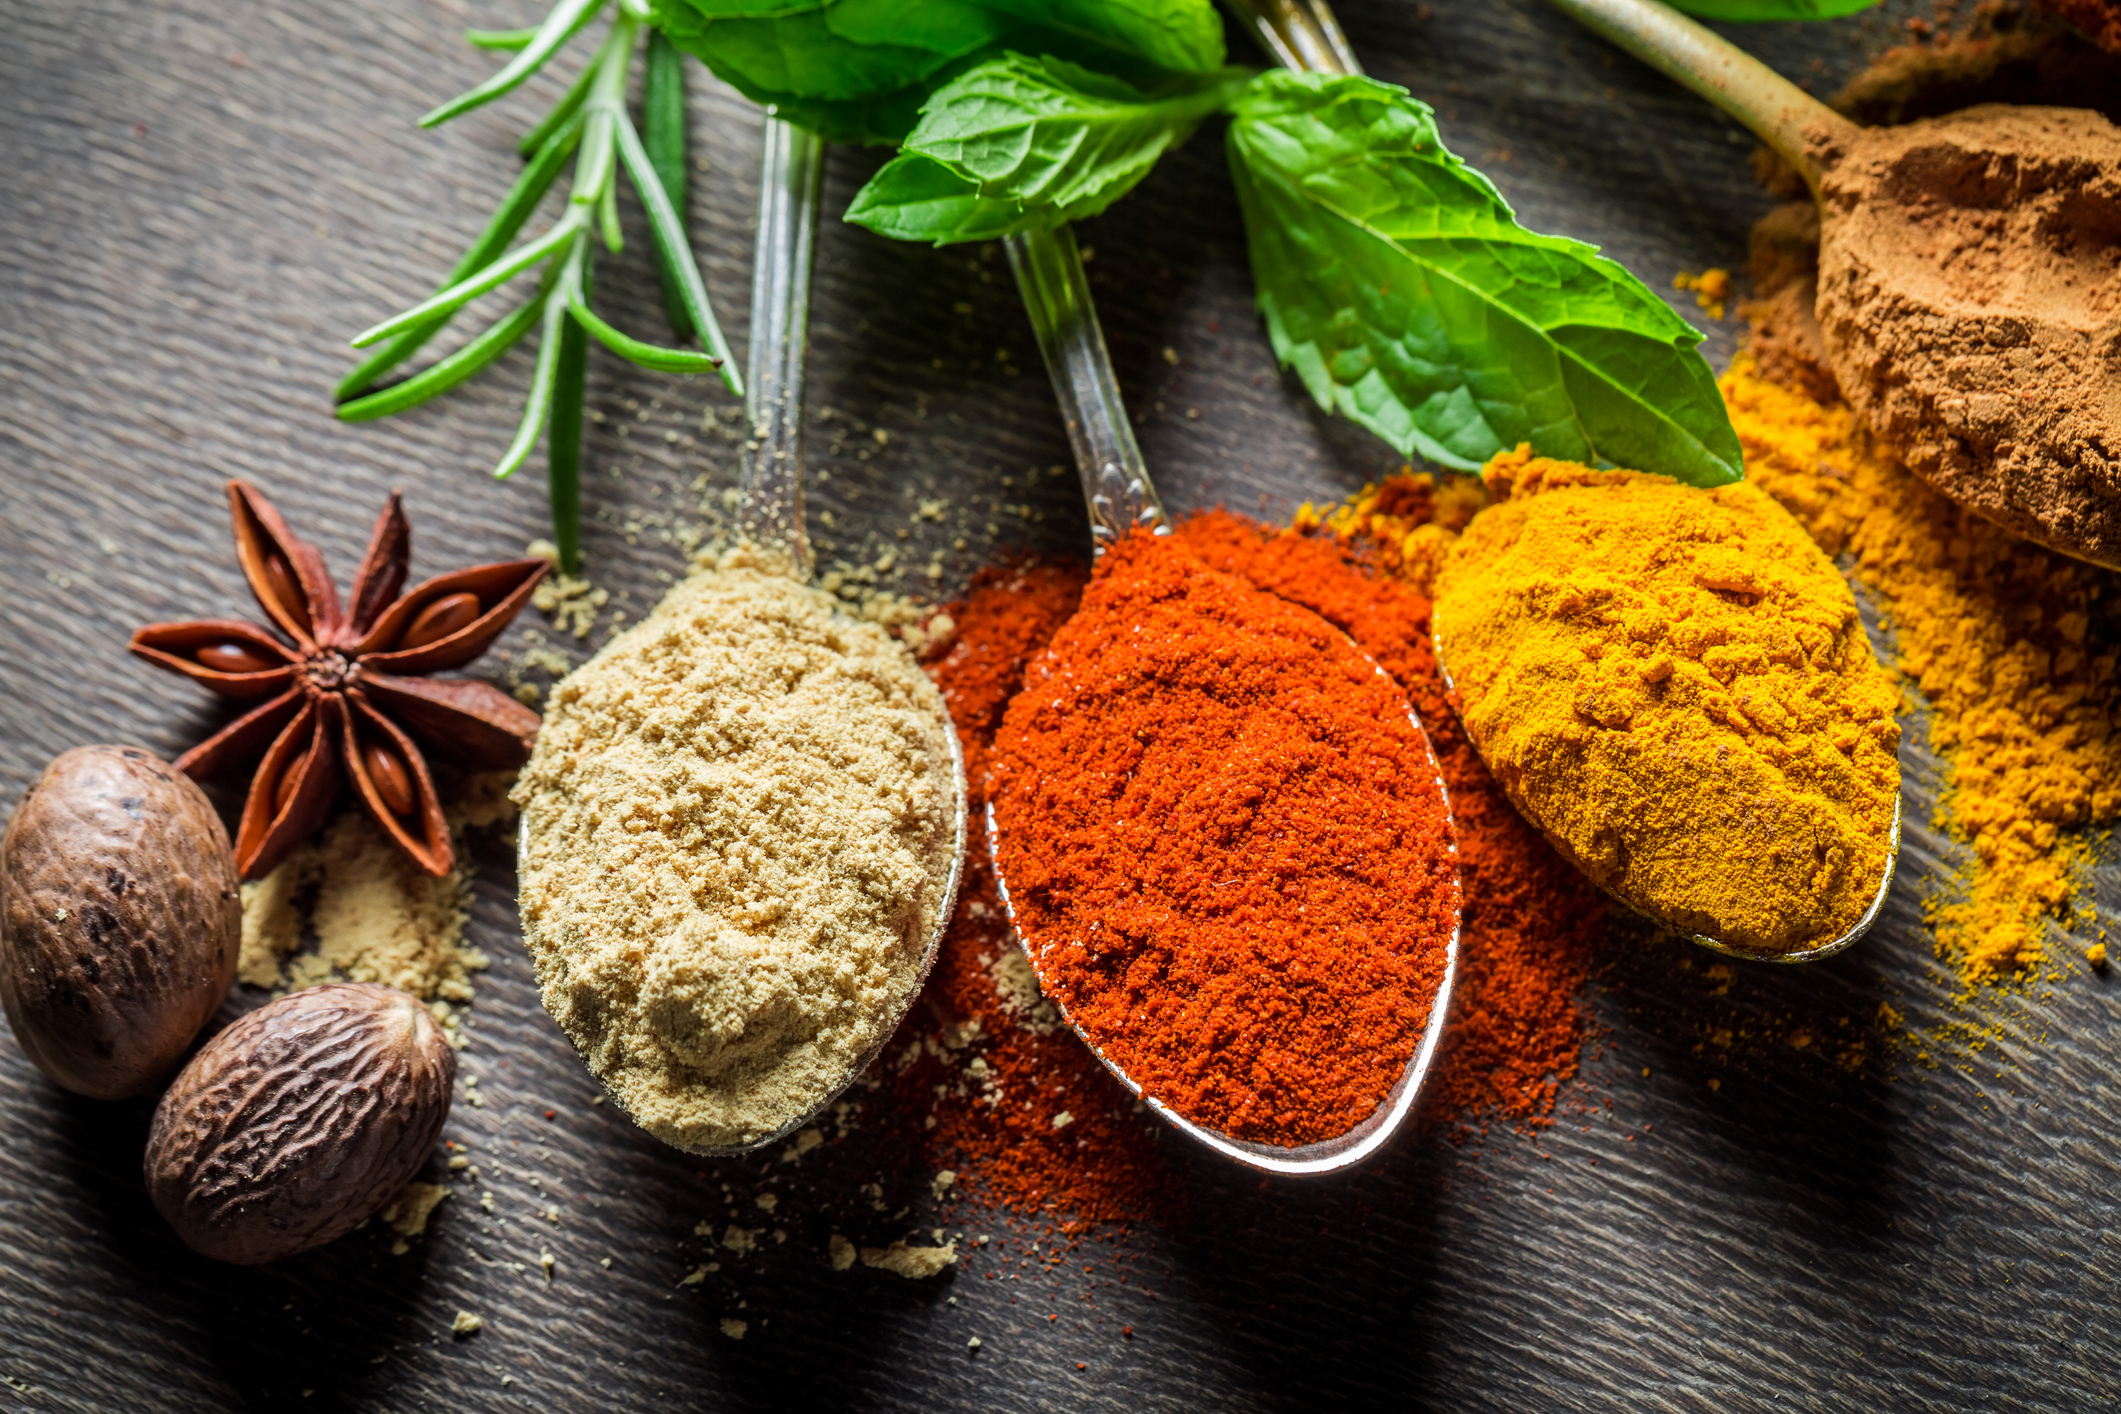 Spice it up: A tasty way to a healthier gut